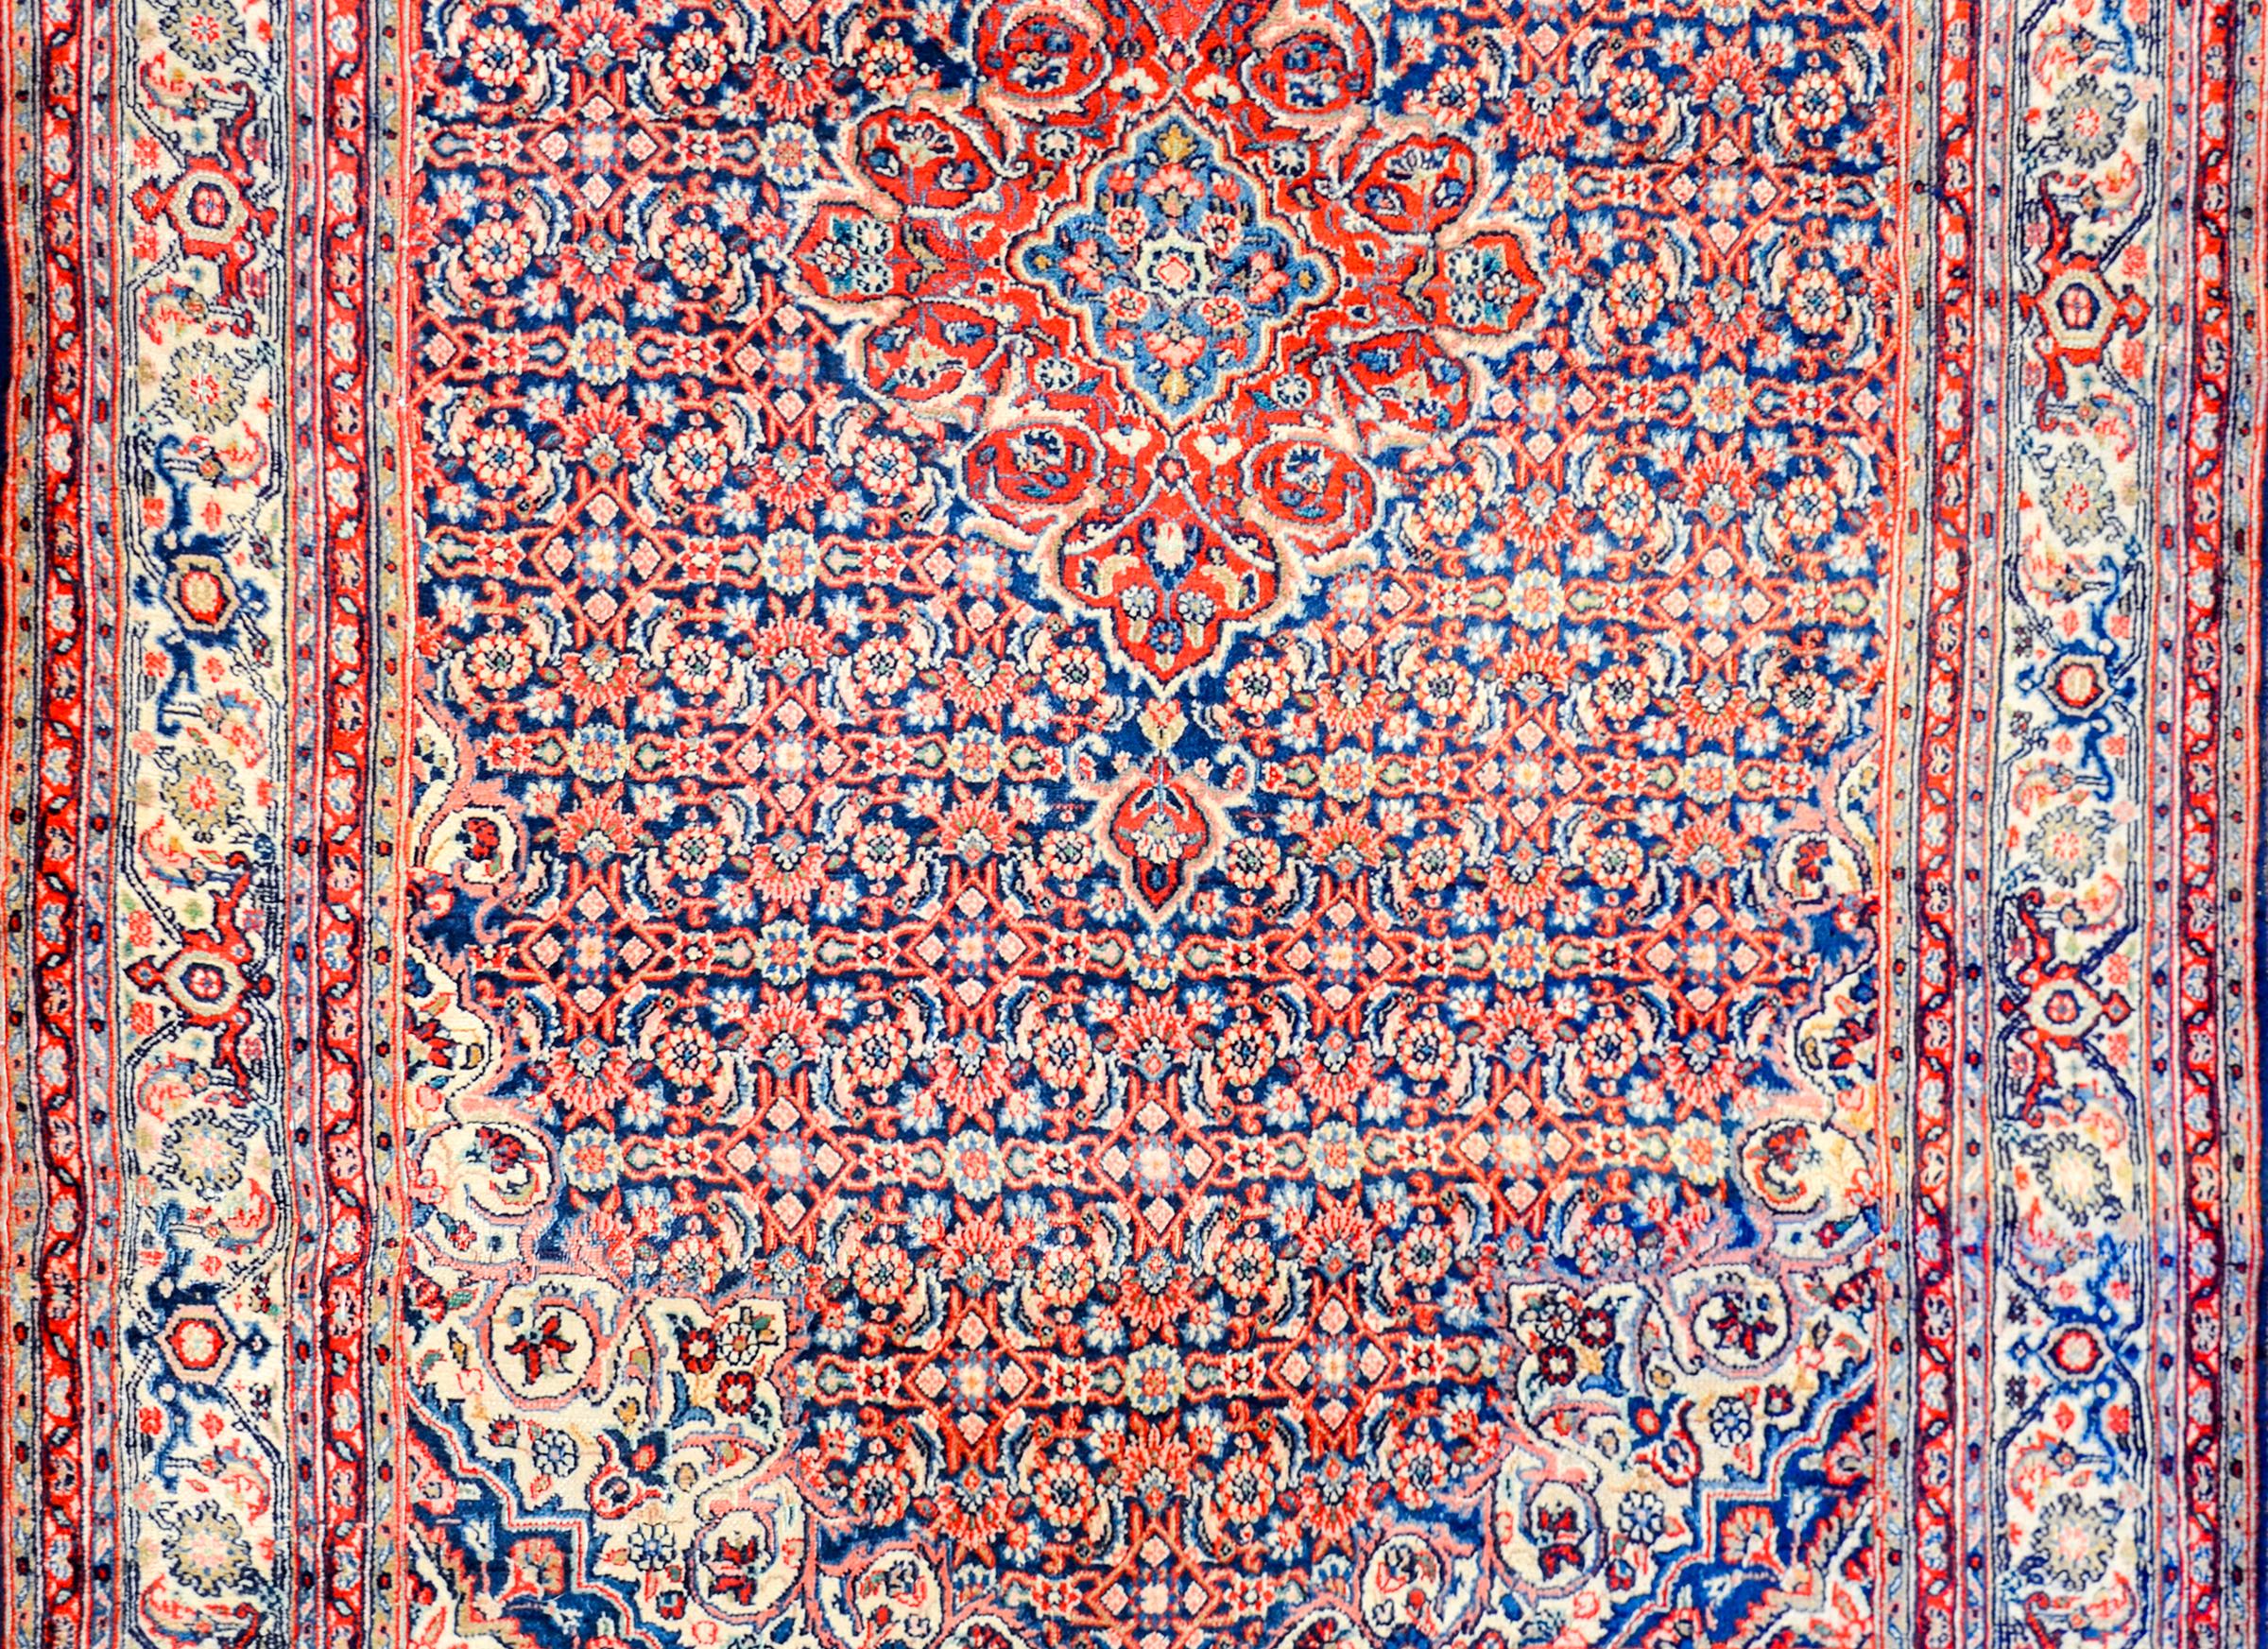 A wonderful early 20th century Persian Tabriz rug with a large red diamond form medallion on a field with an all-over crimson and indigo trellis and floral pattern. The border is wonderful with a wide central floral and vine patterned stripe flanked